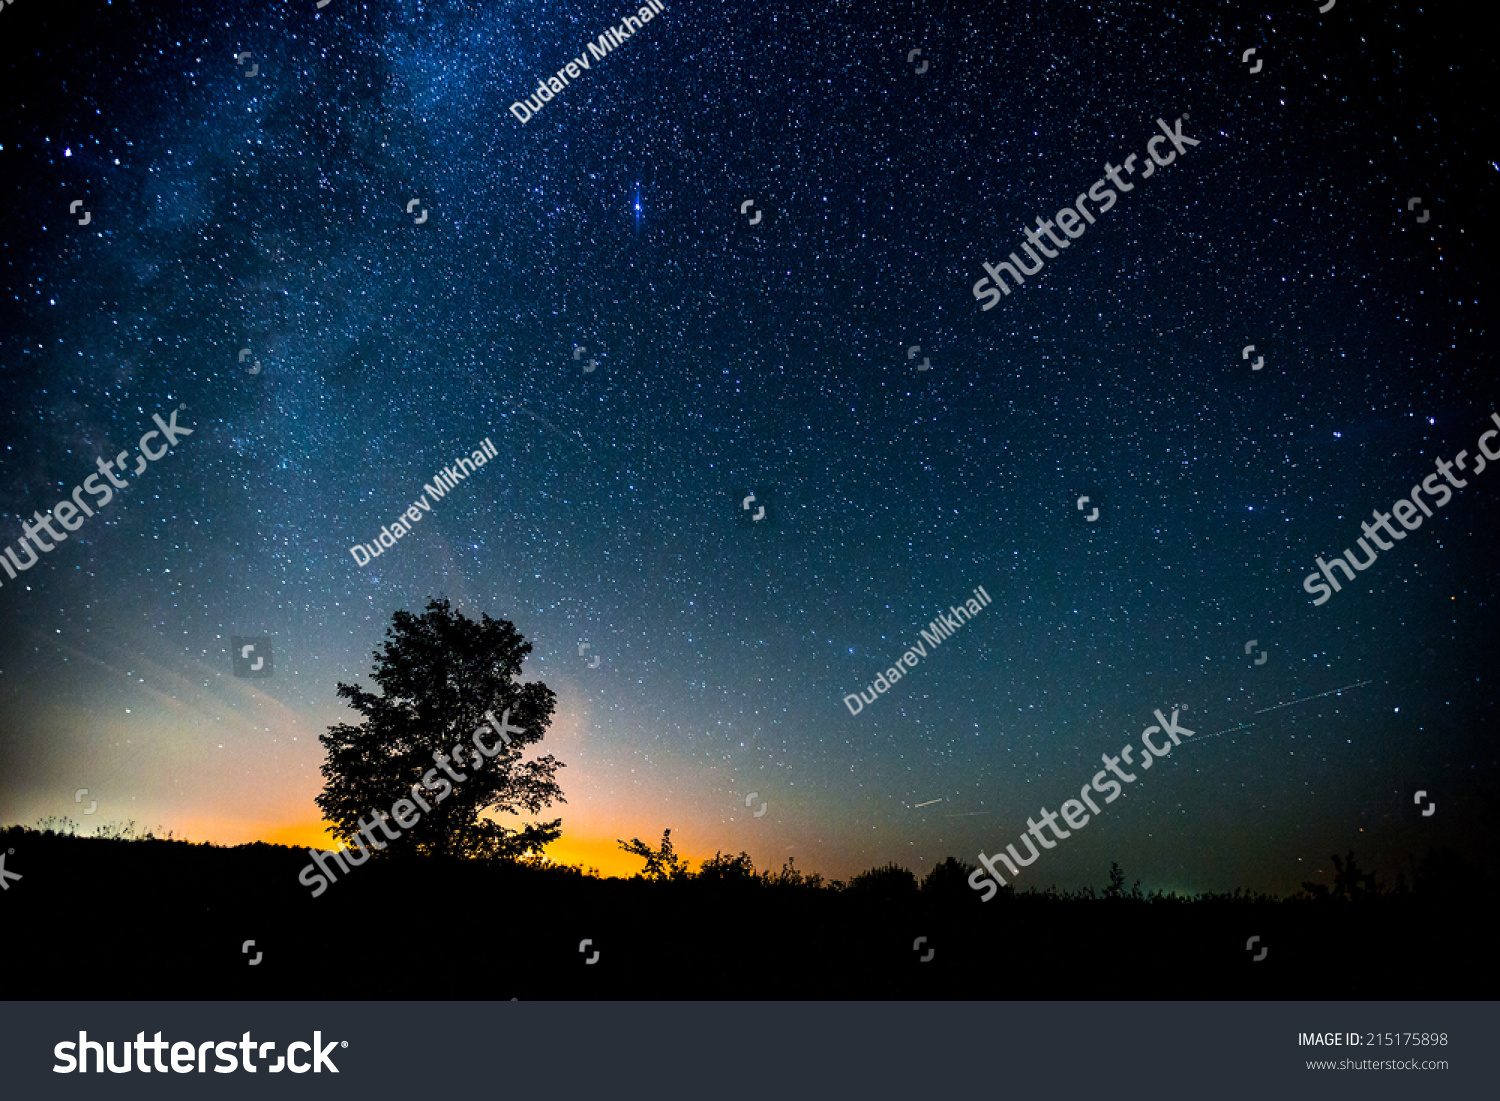 Starry sky and summer meadow with tree. High level of noise #215175898